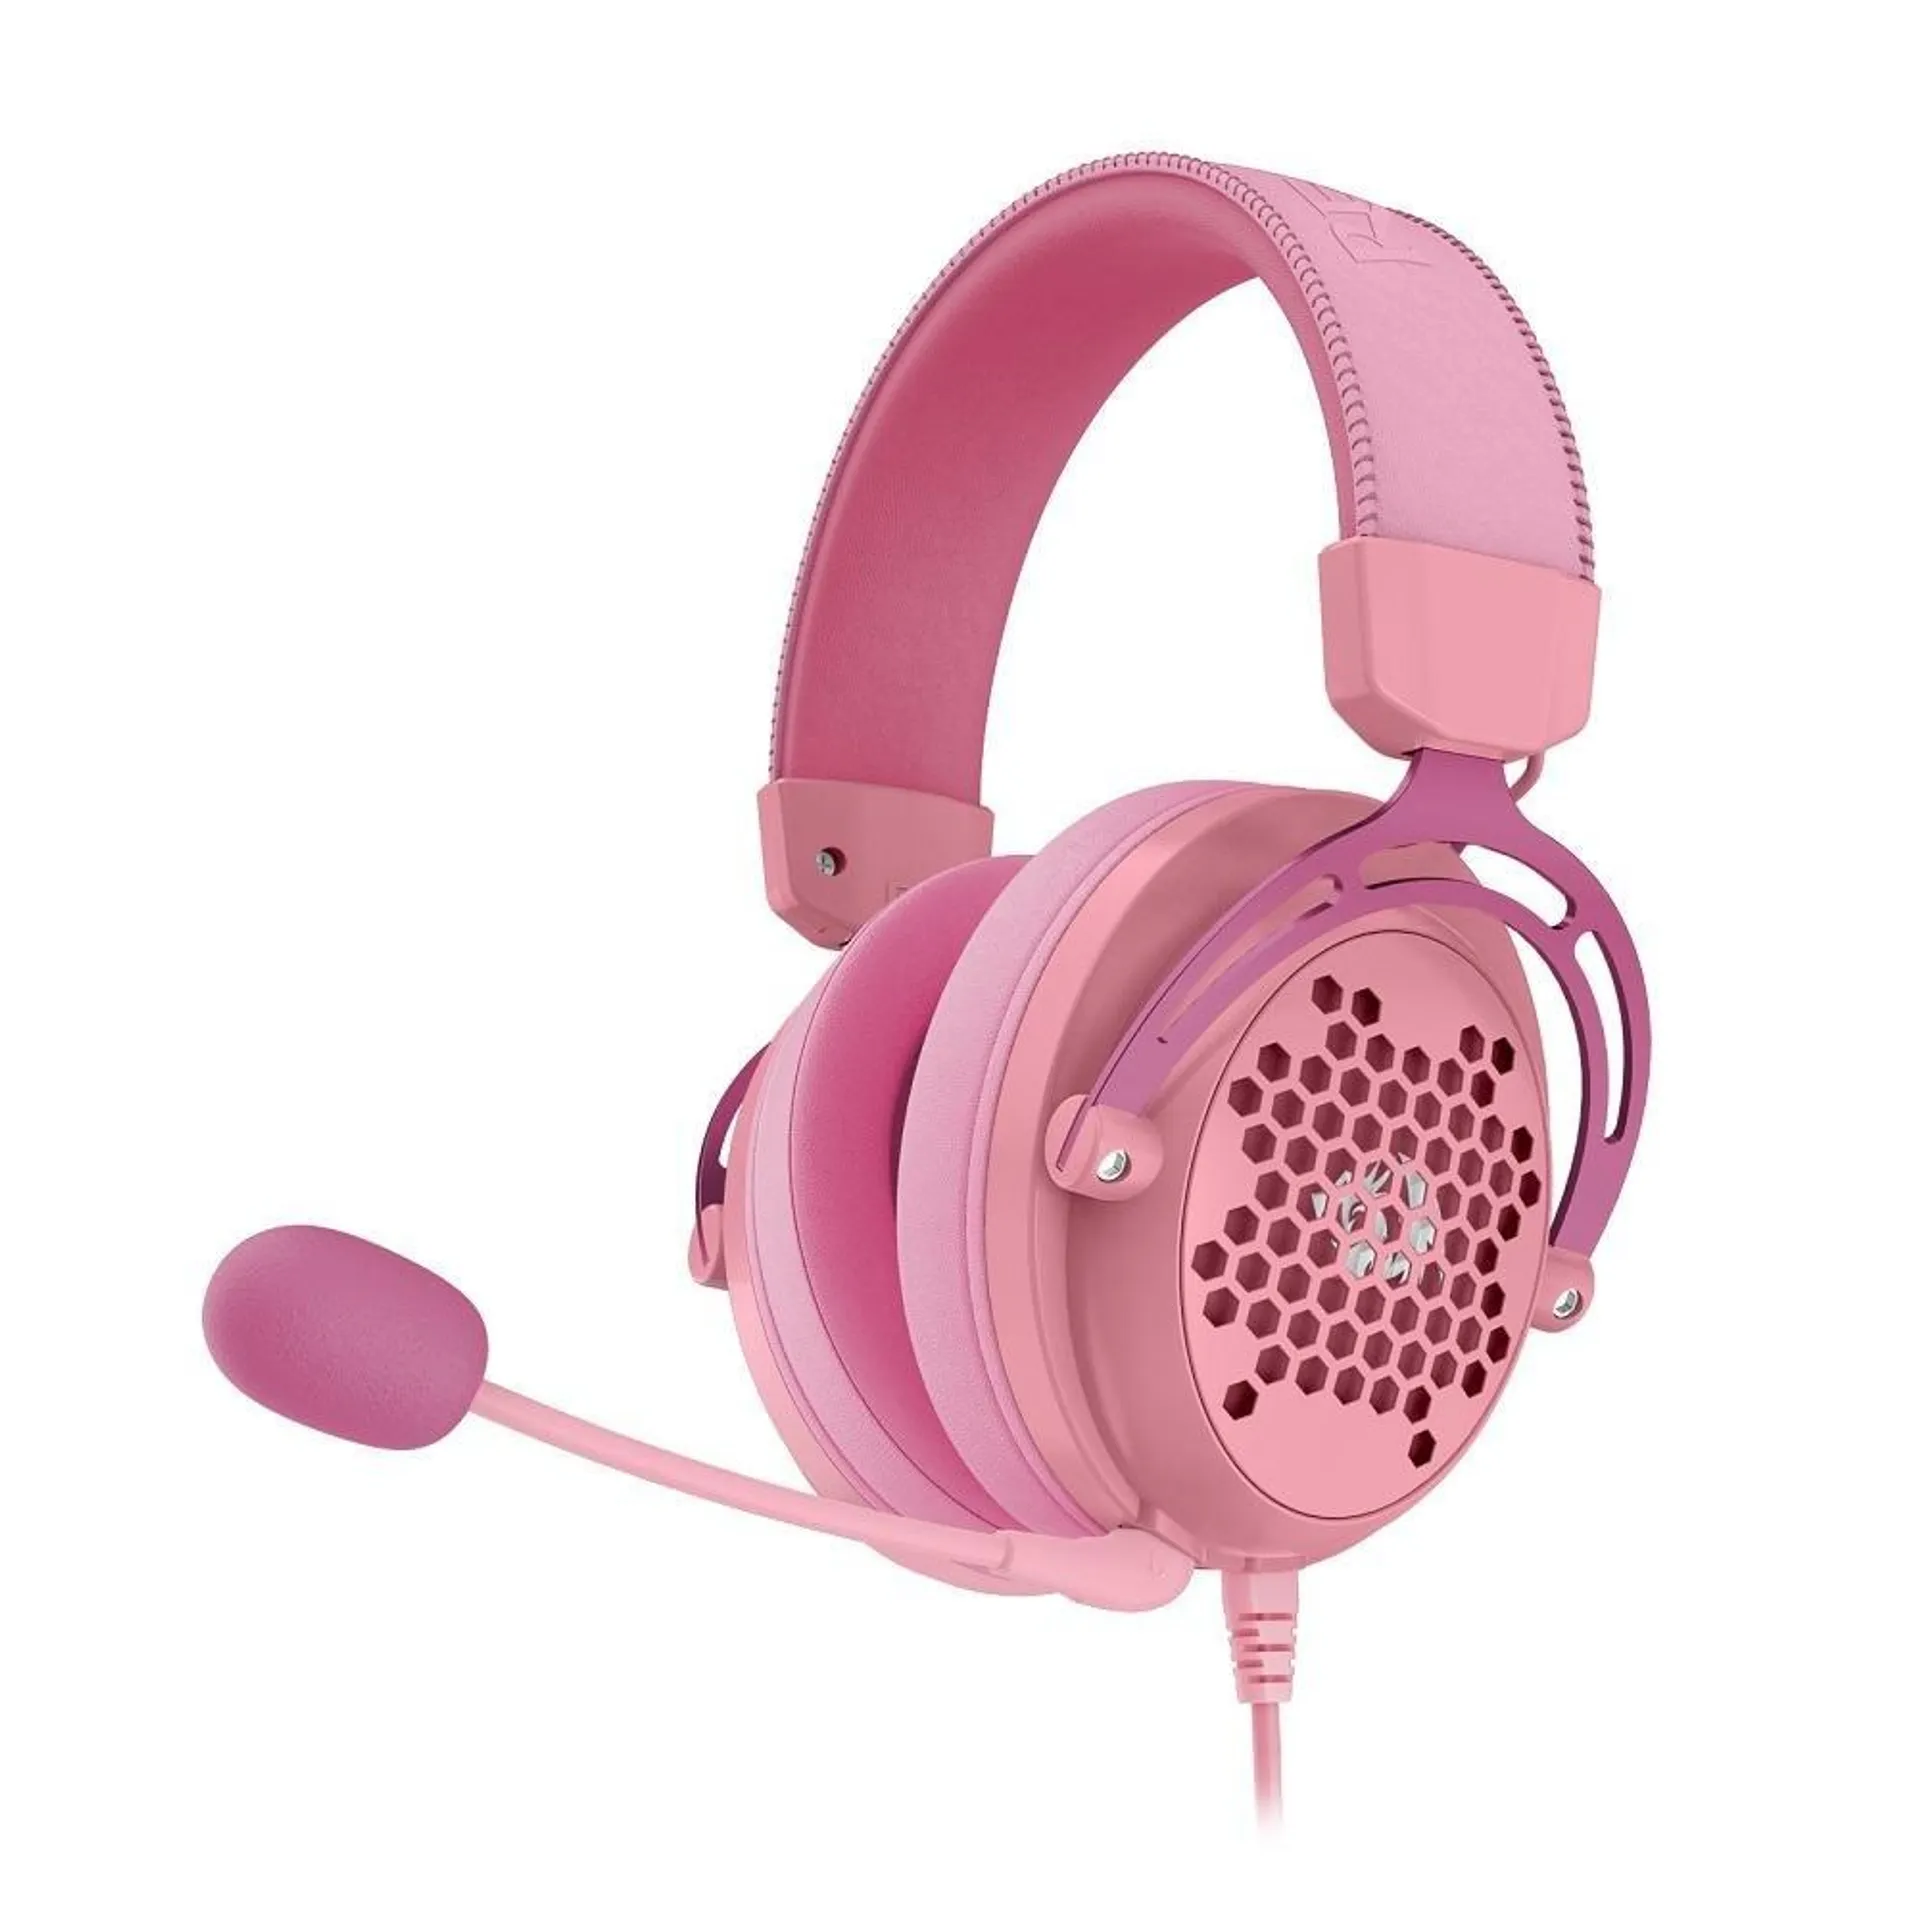 Fone Headset Gamer Diomedes H388-P, Rosa, 7.1 canais, REDRAGON